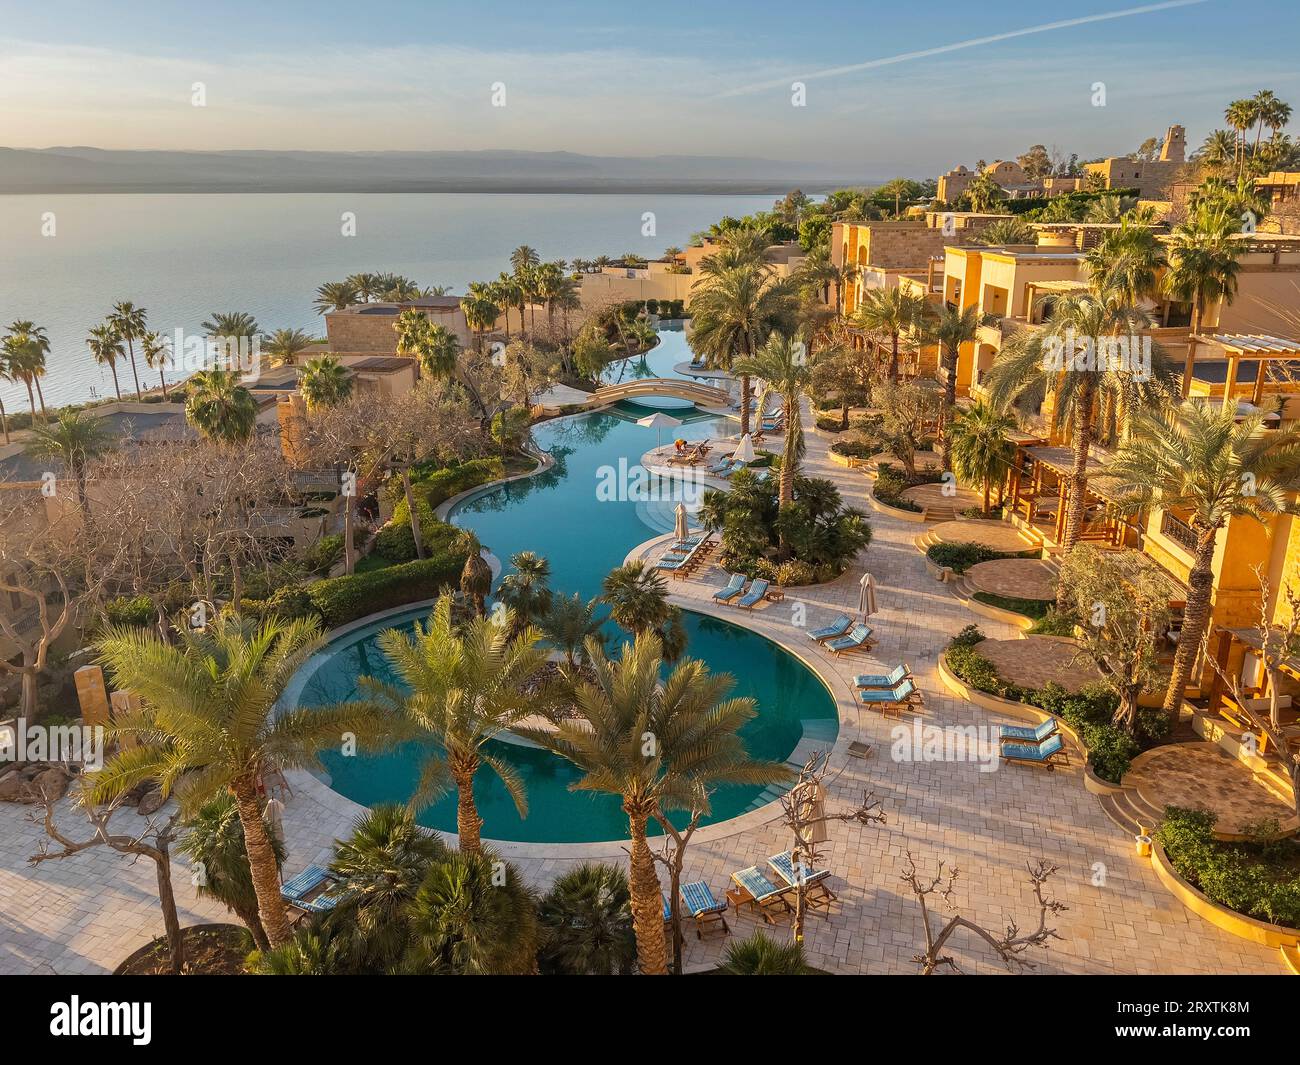 Sunset at the Kempinski Hotel Ishtar, a five-star luxury resort by the Dead Sea inspired by the Hanging Gardens of Babylon, Jordan, Middle East Stock Photo